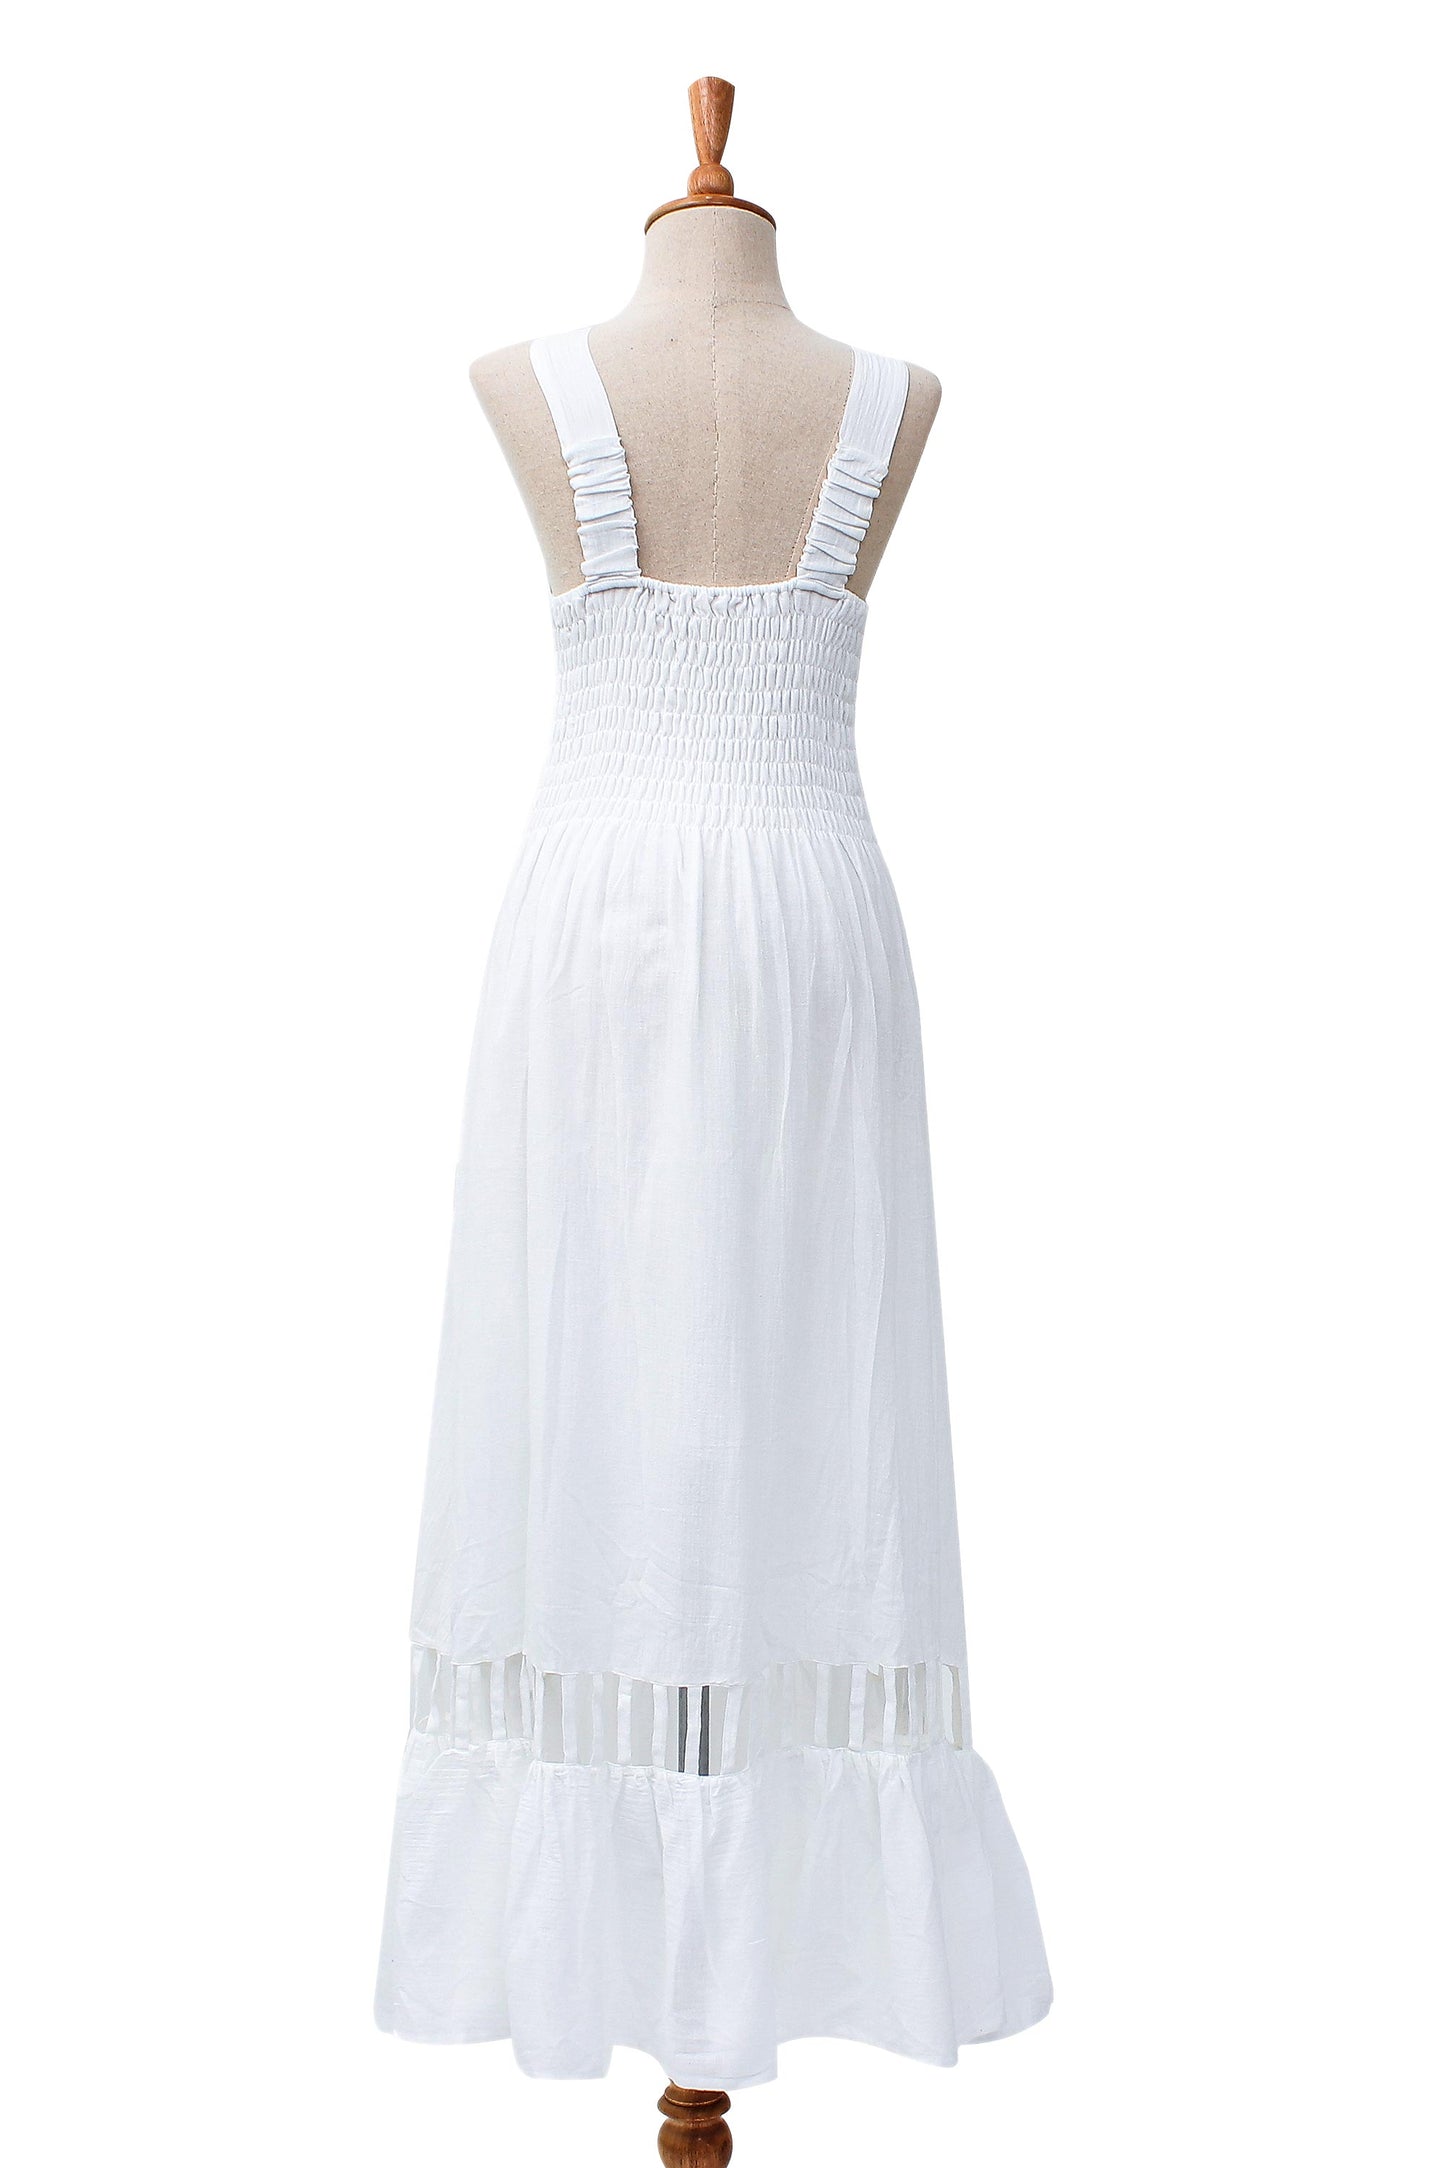 Soiree in White Hand Crafted White Cotton Sundress